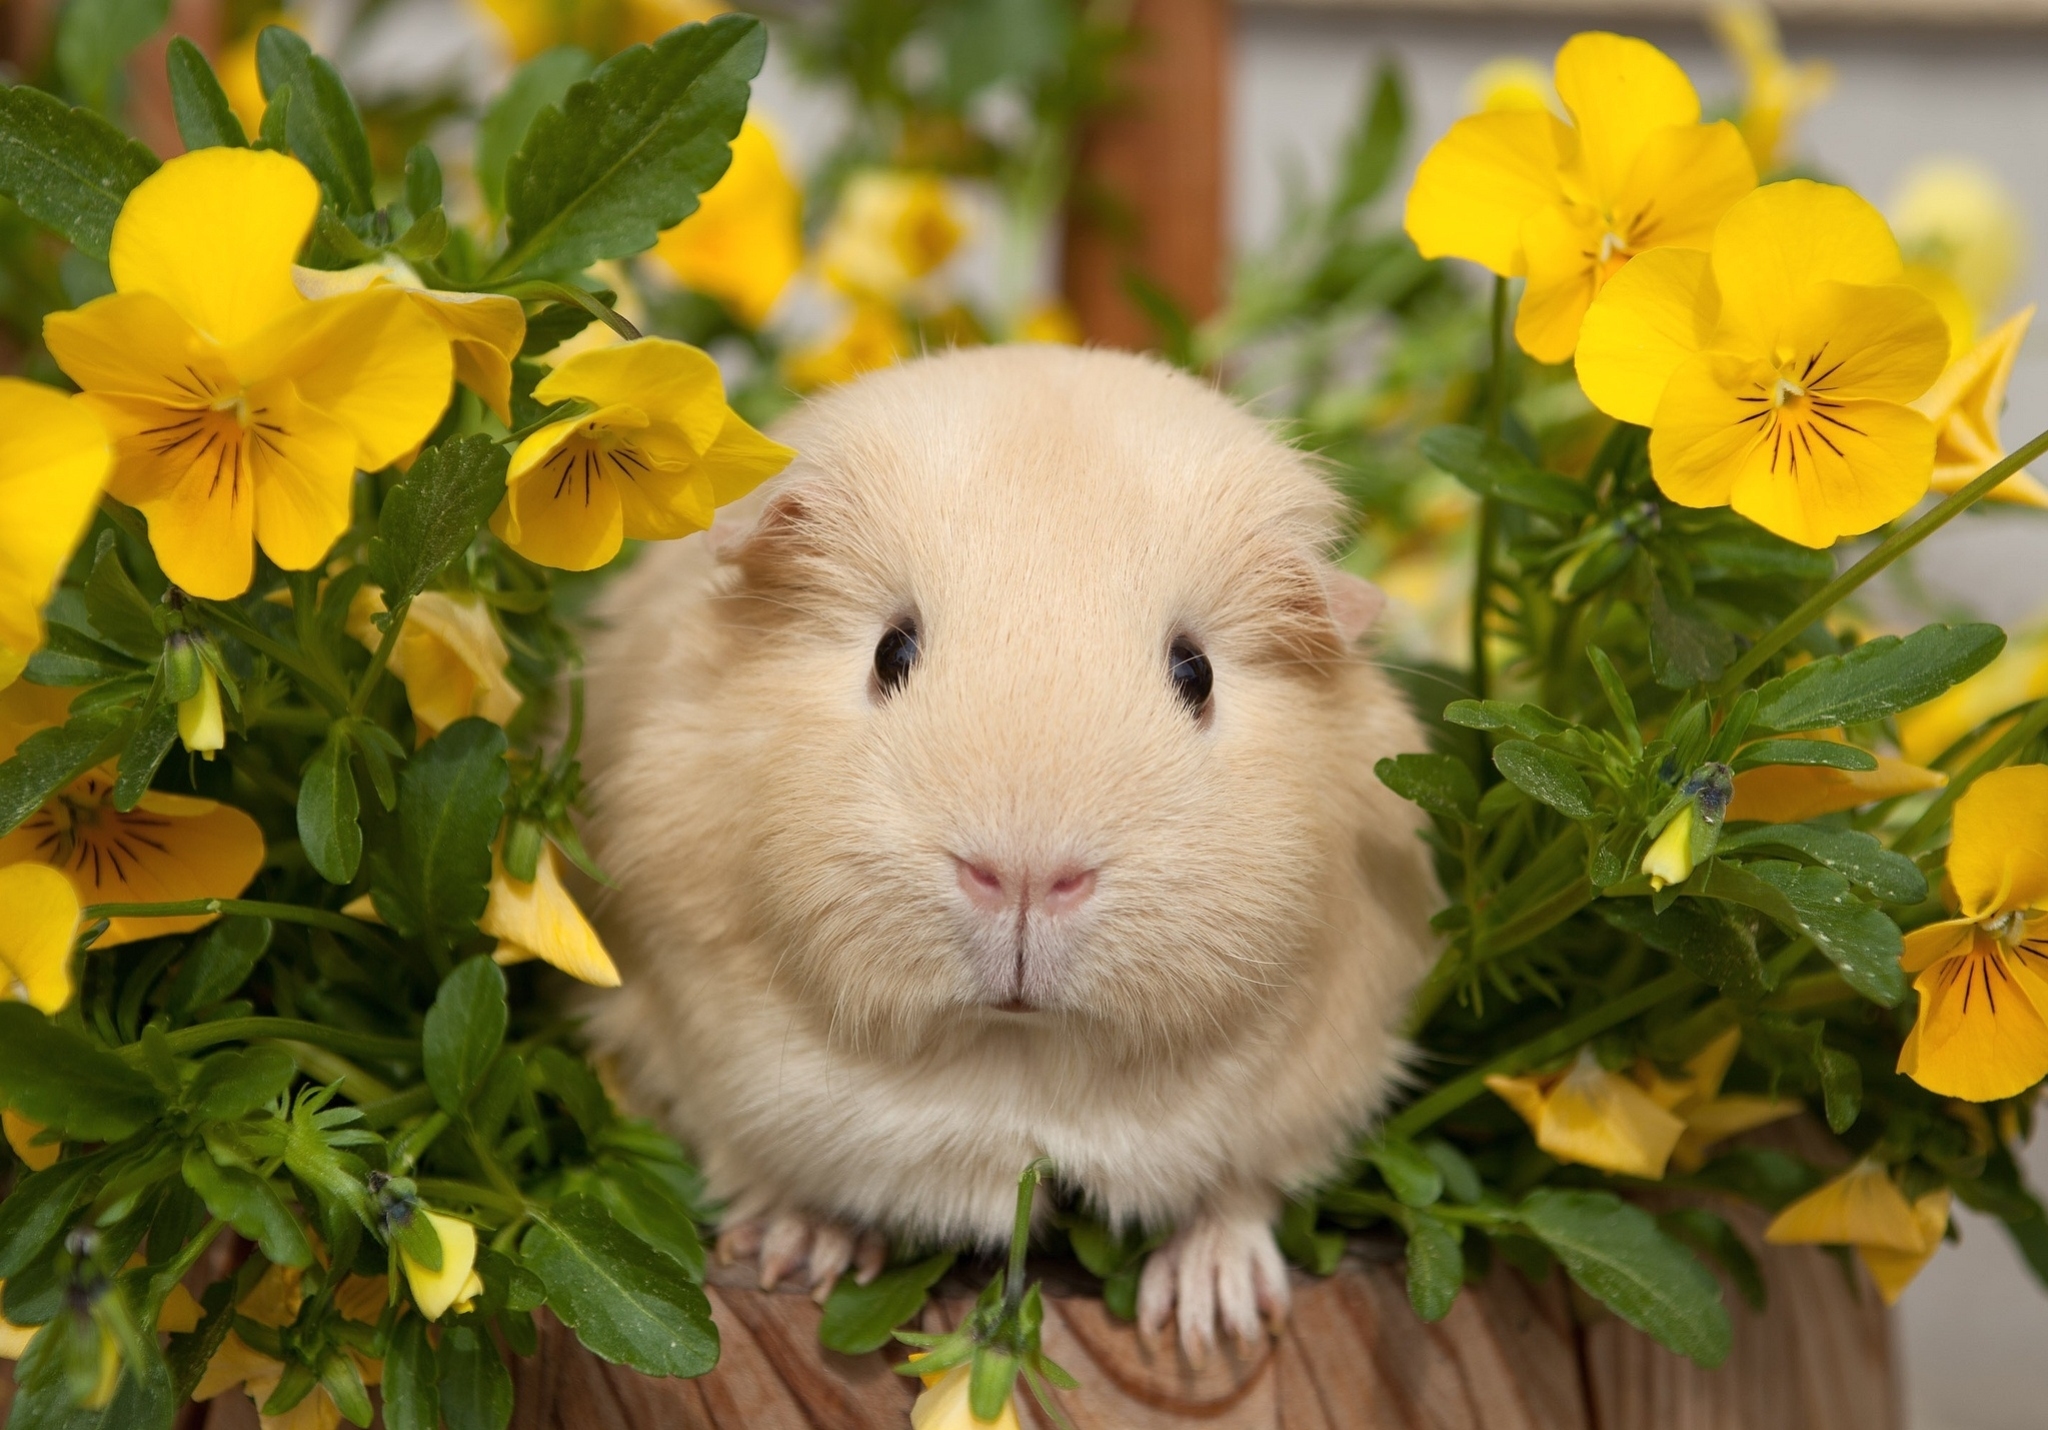 79442 download wallpaper animals, flowers, pansies, guinea pig screensavers and pictures for free